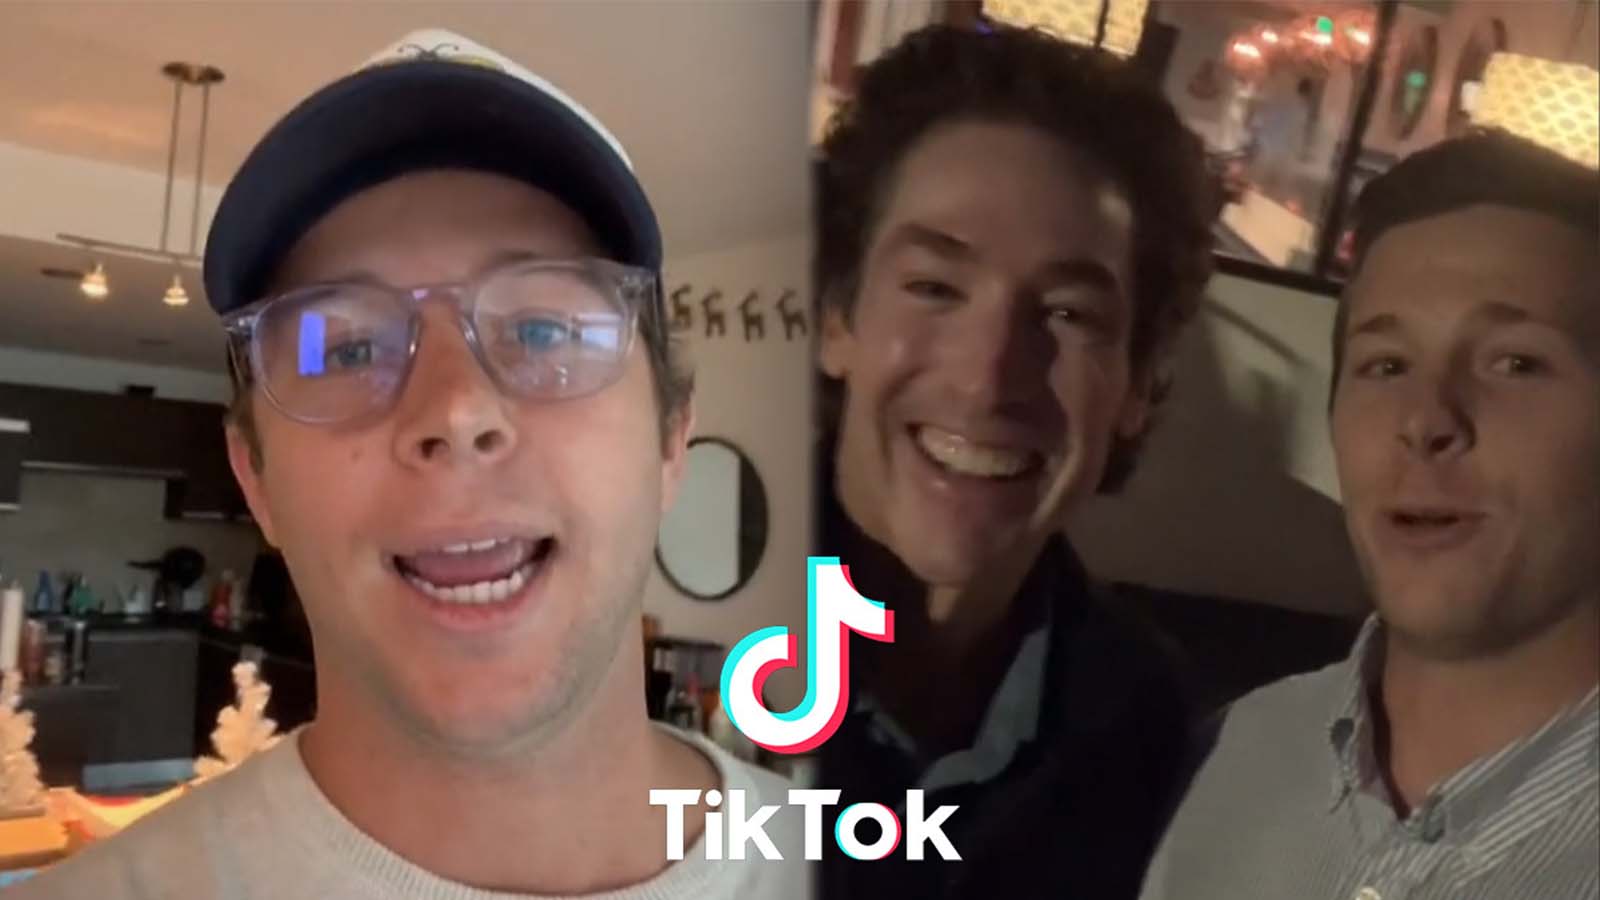 nickandsoph loses job after insulting joel osteen